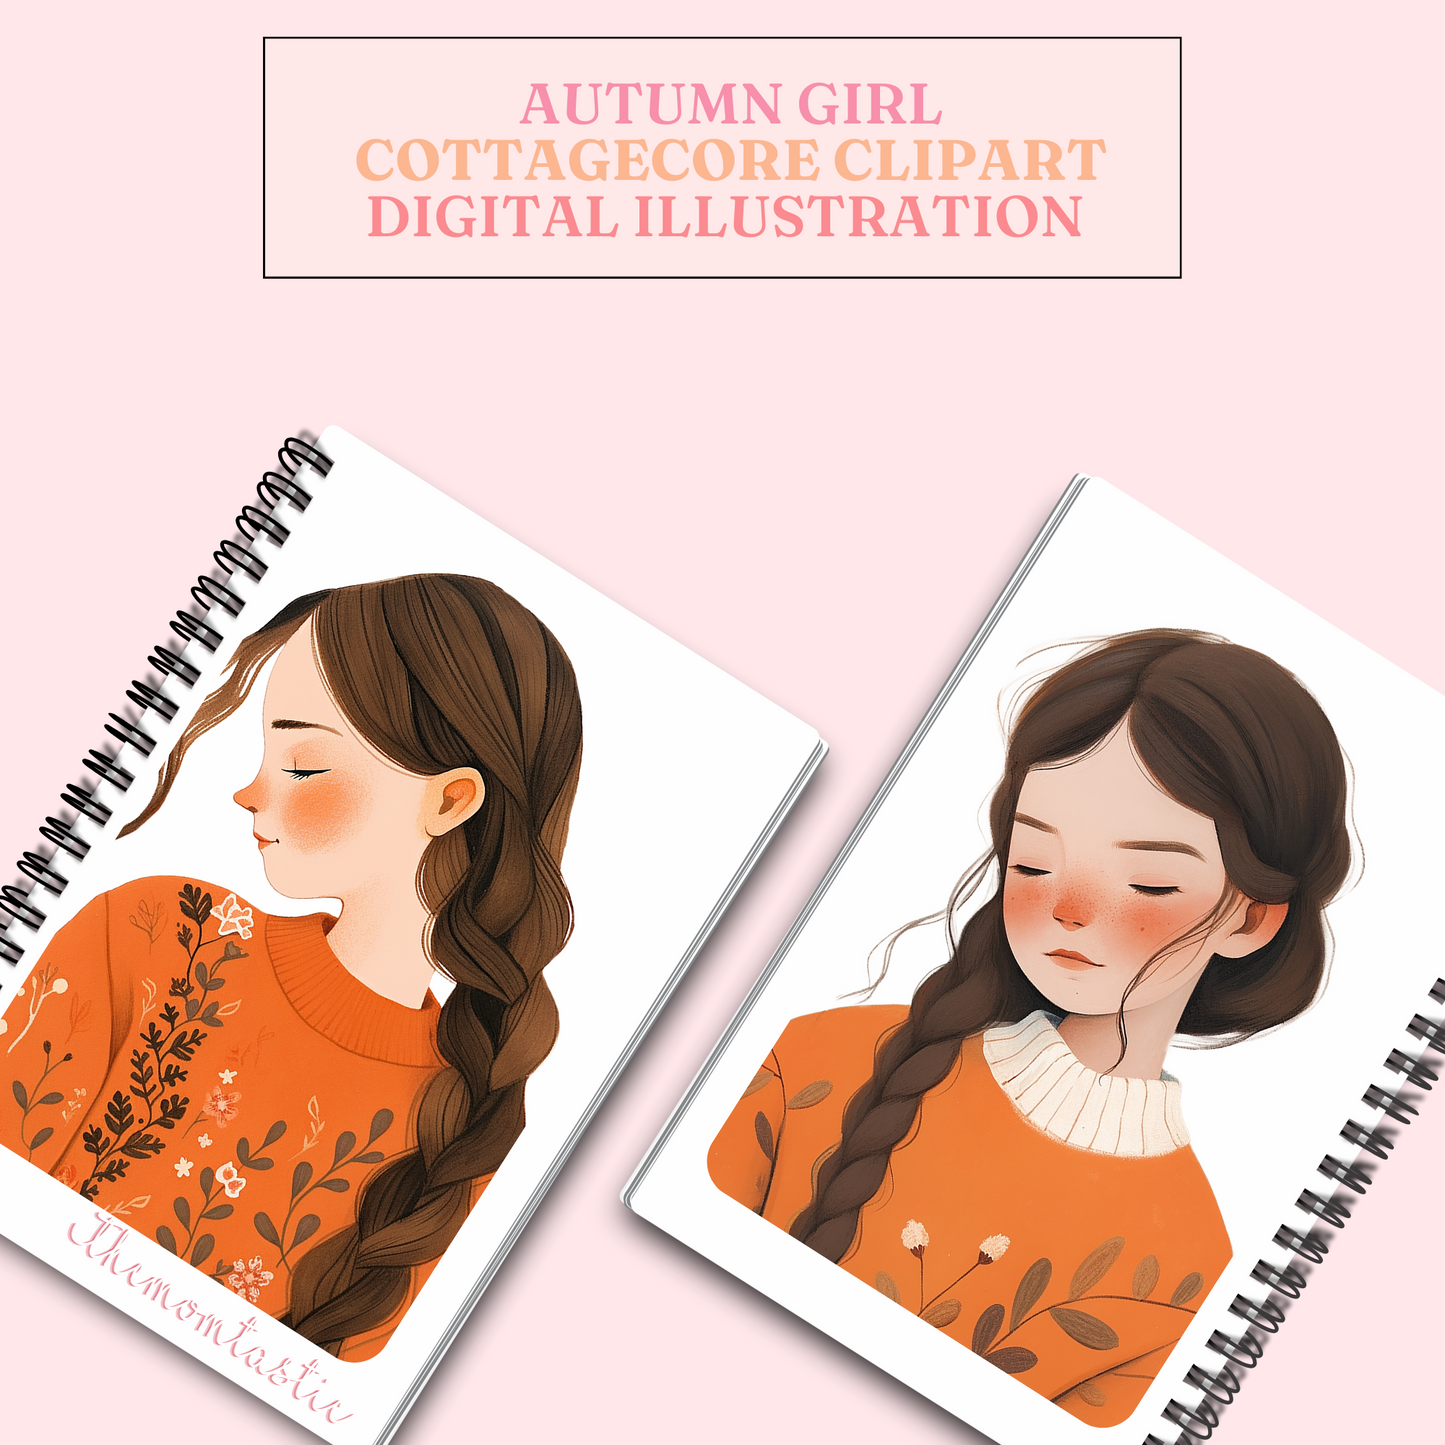 Autumn Girl Cottagecore Cliparts – High-Quality PNG - Transparent Background - Commercial Use